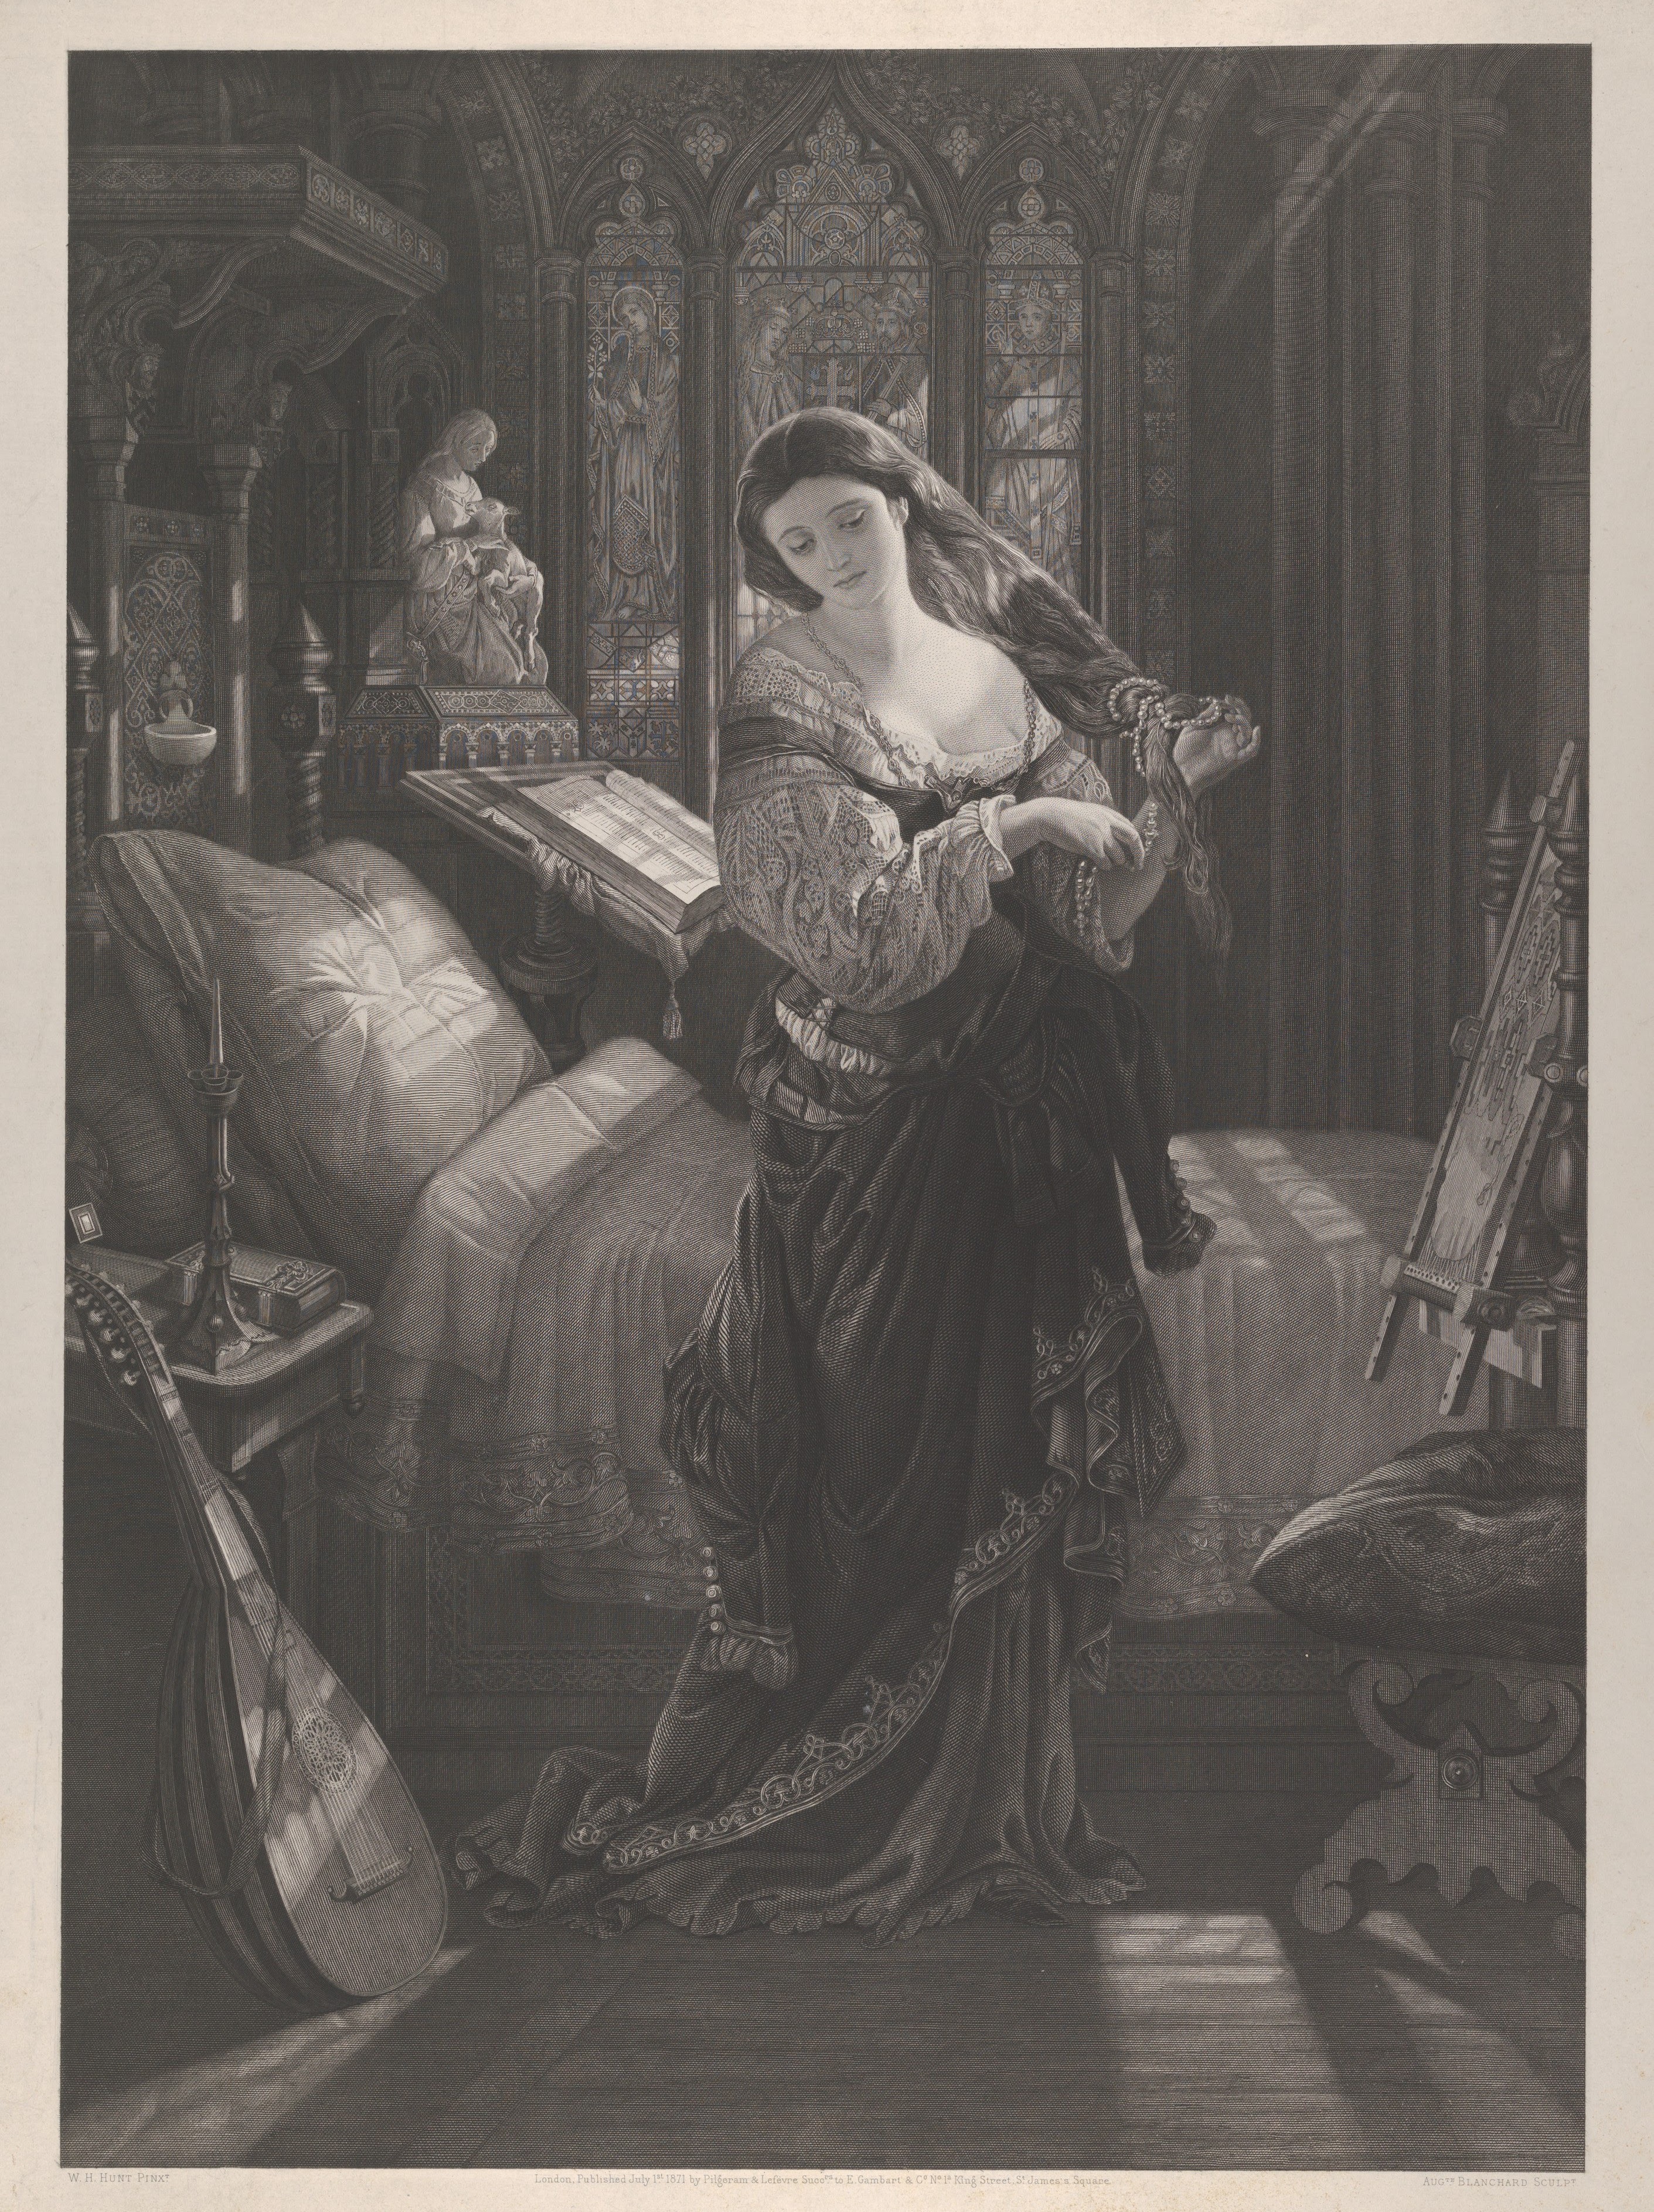 Madeline after Prayer, engraved by Auguste-Thomas-Marie Blanchard (1871)
        after|Daniel Maclise, The Metropolitan Museum of Art (63.648.28). Porphyro is hidden in the
        closet—watching and waiting. 